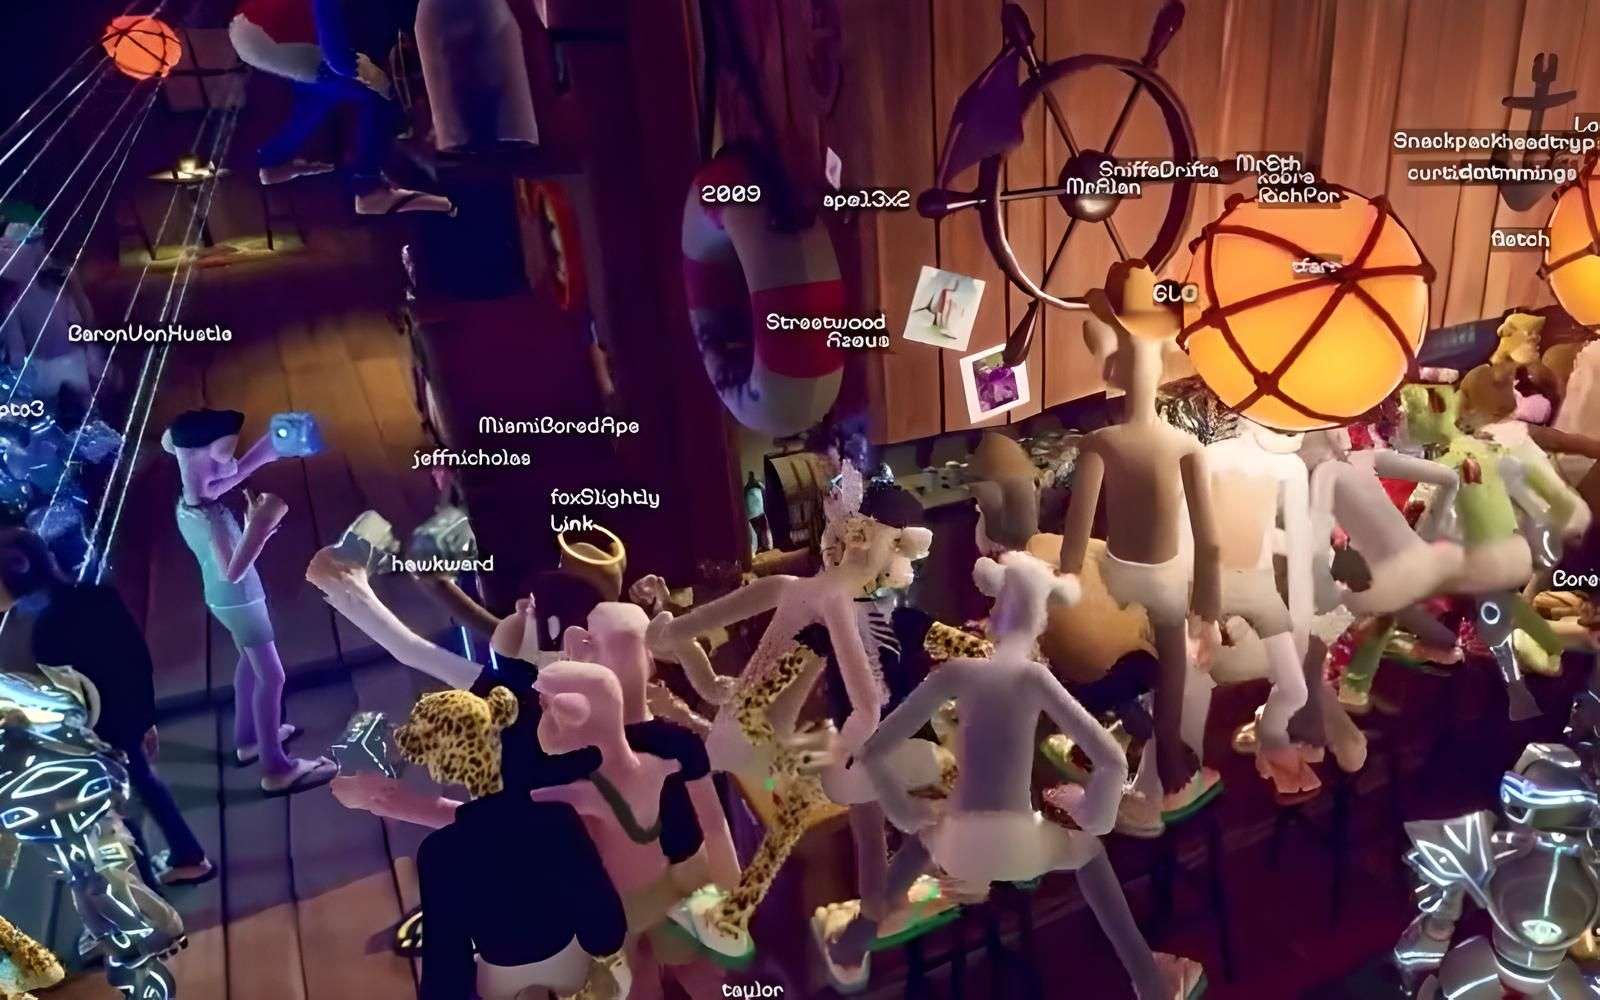 A group of ape avatars, many wearing only white shorts, stand in a bar and clubhouse. Many of them are standing on a wooden bar and are in the middle of a twerking animation.